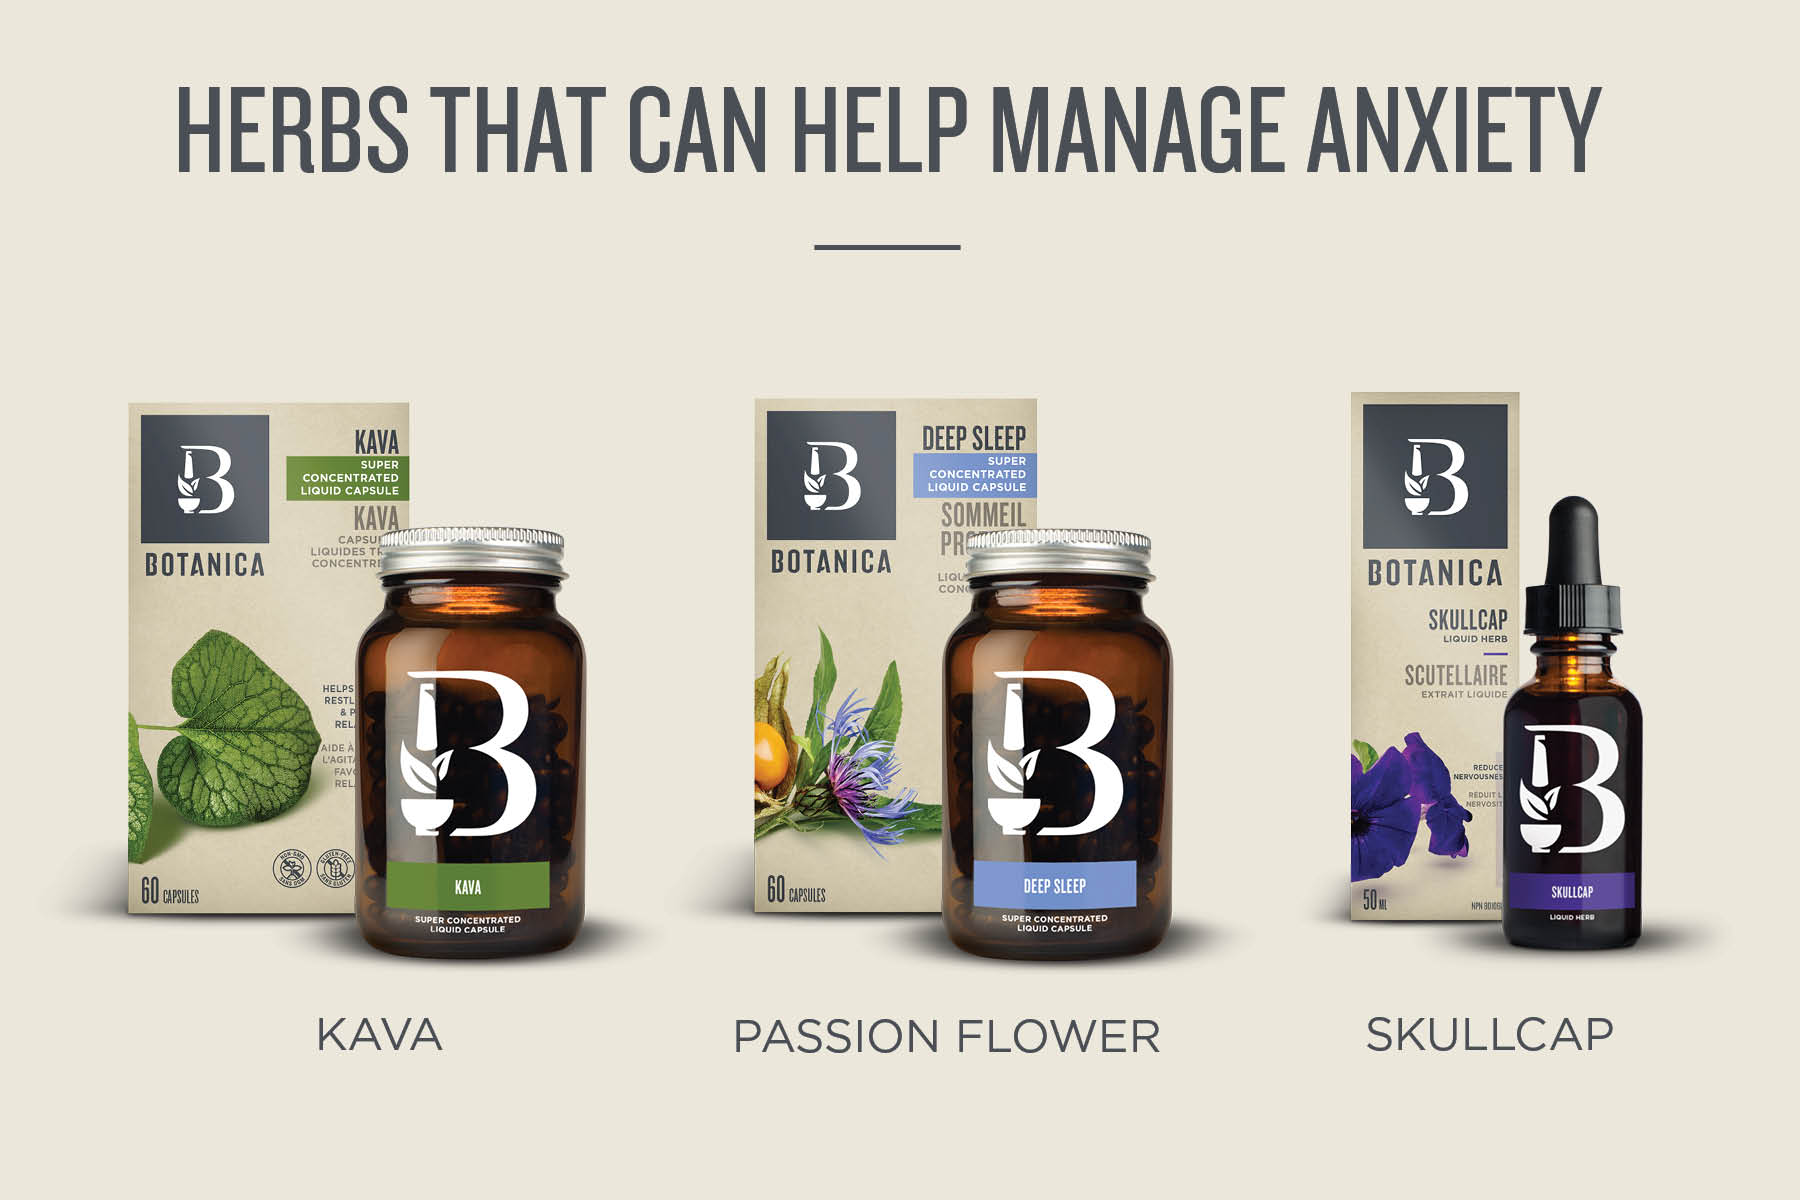 How to flow with anxiety - Herbs to help manage anxiety